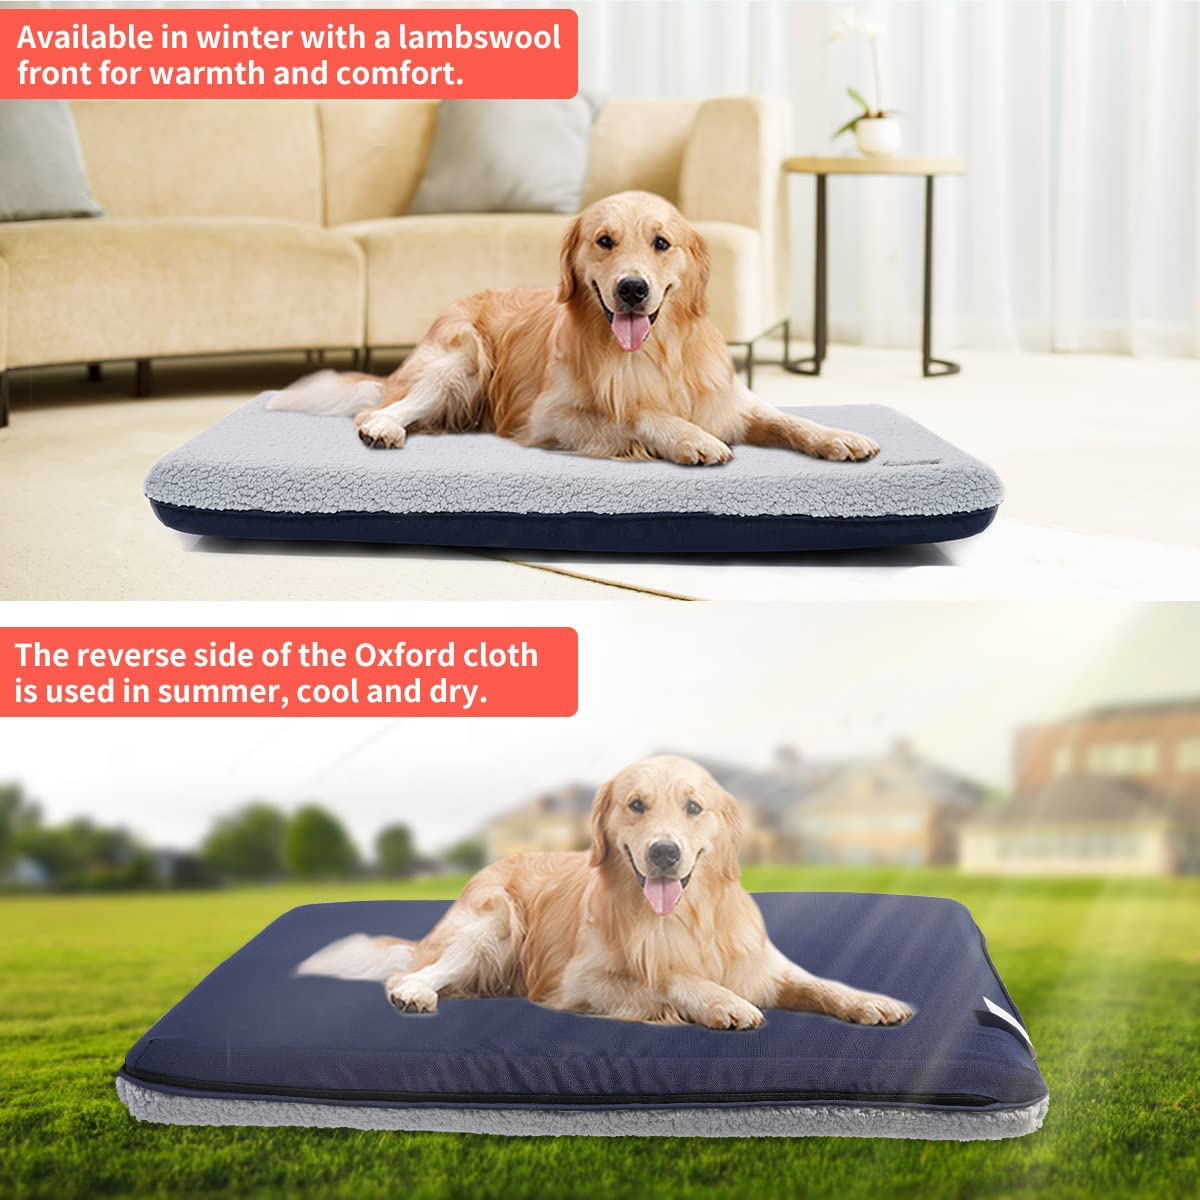 Dog Beds, Memory Foam Beds for Large, Medium, & Small Dogs